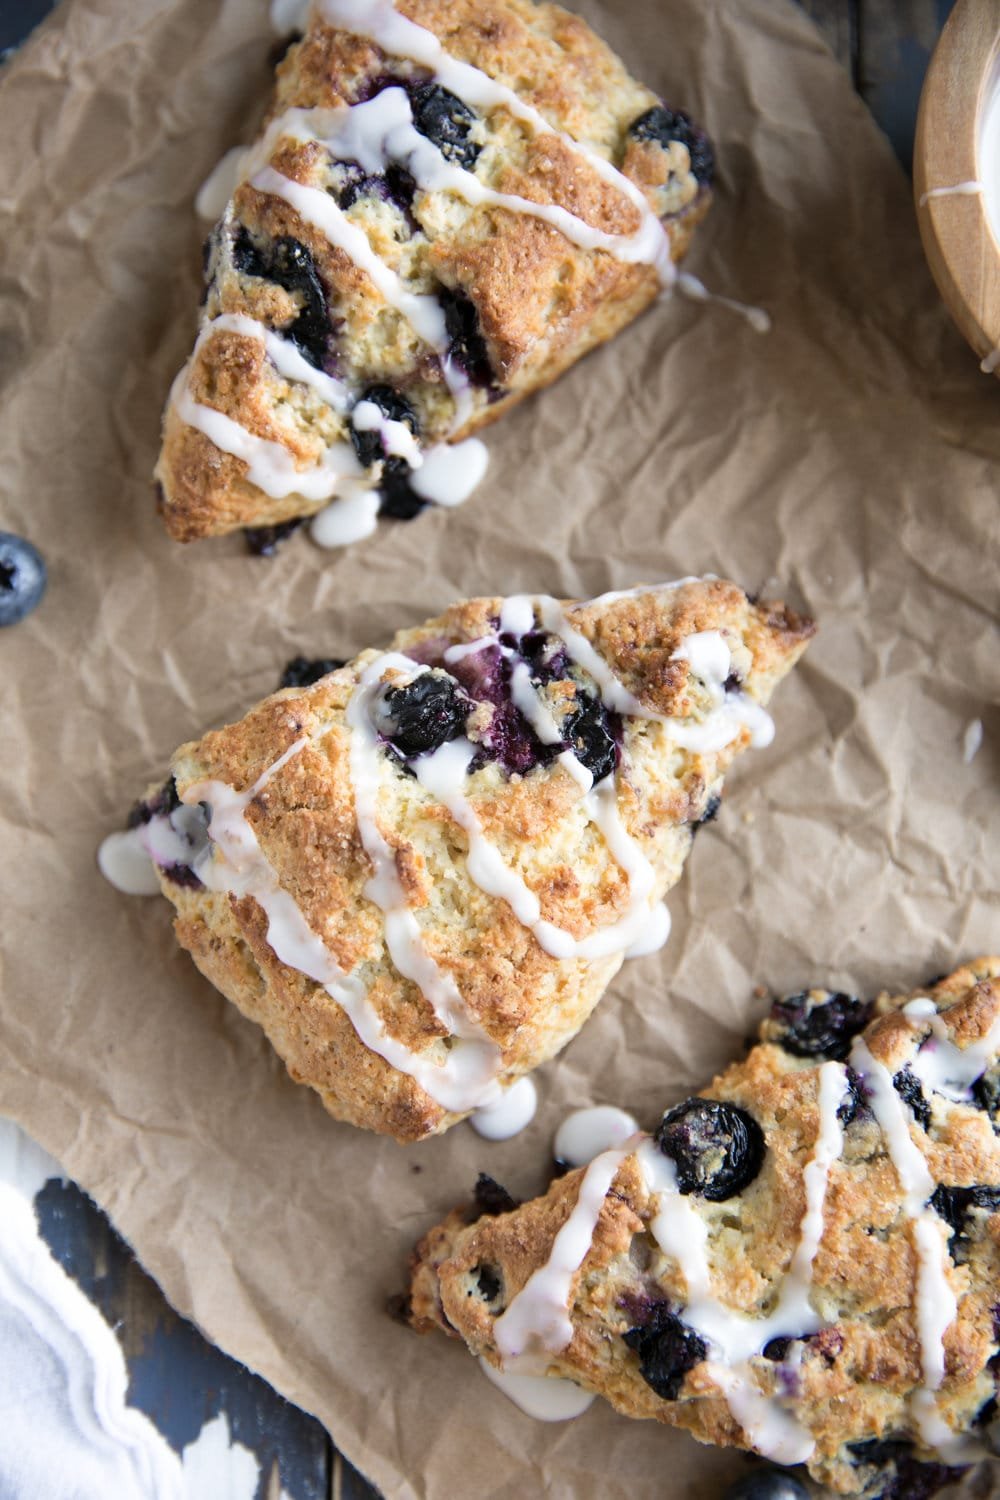 A blueberry scone